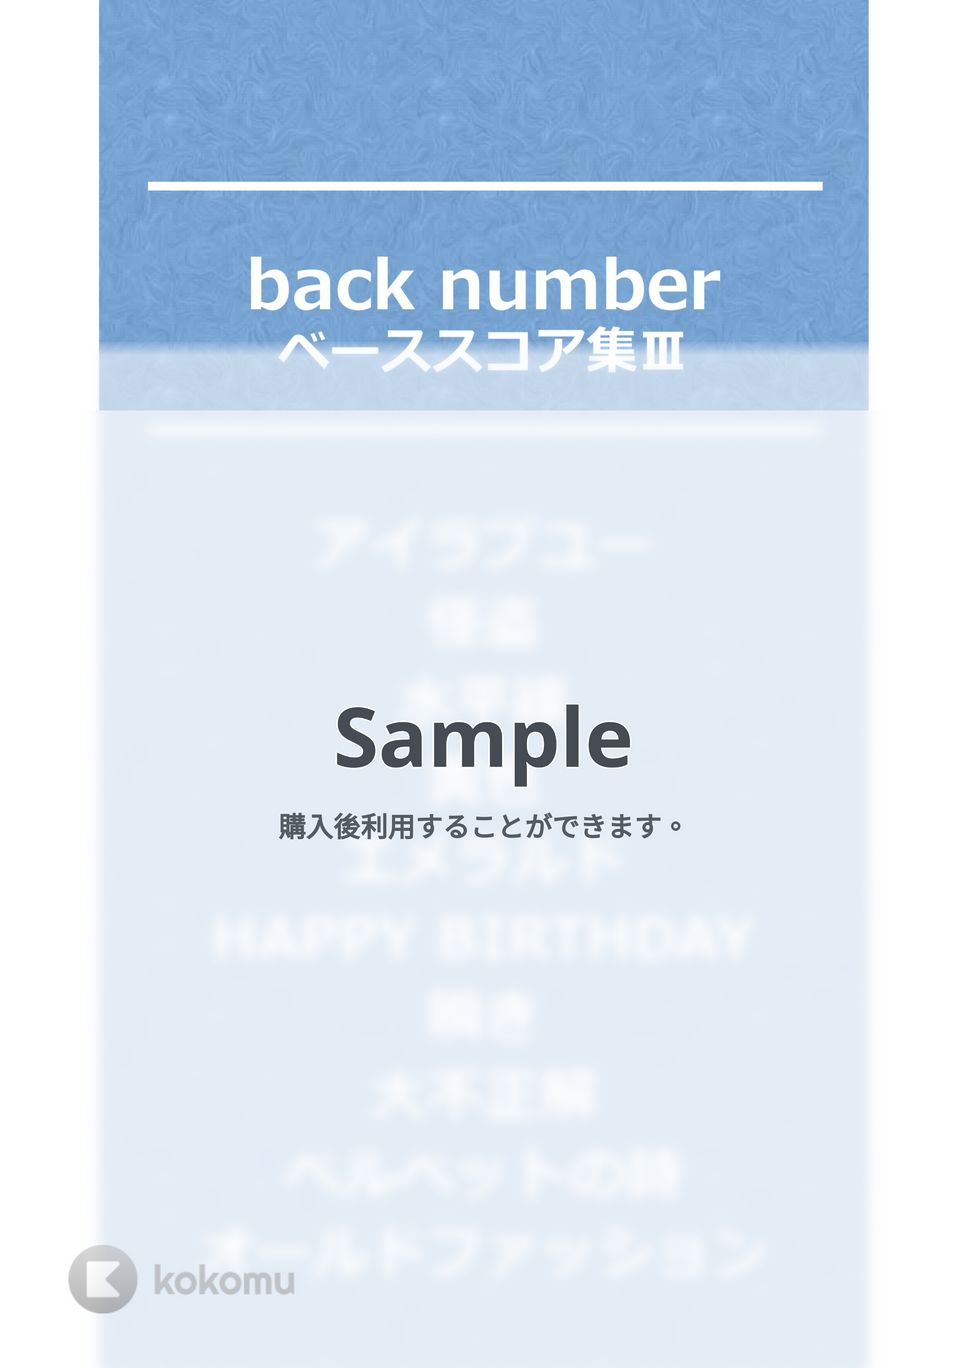 back number - back number ベースTAB譜面 10曲セット集Ⅰ by たぶべー